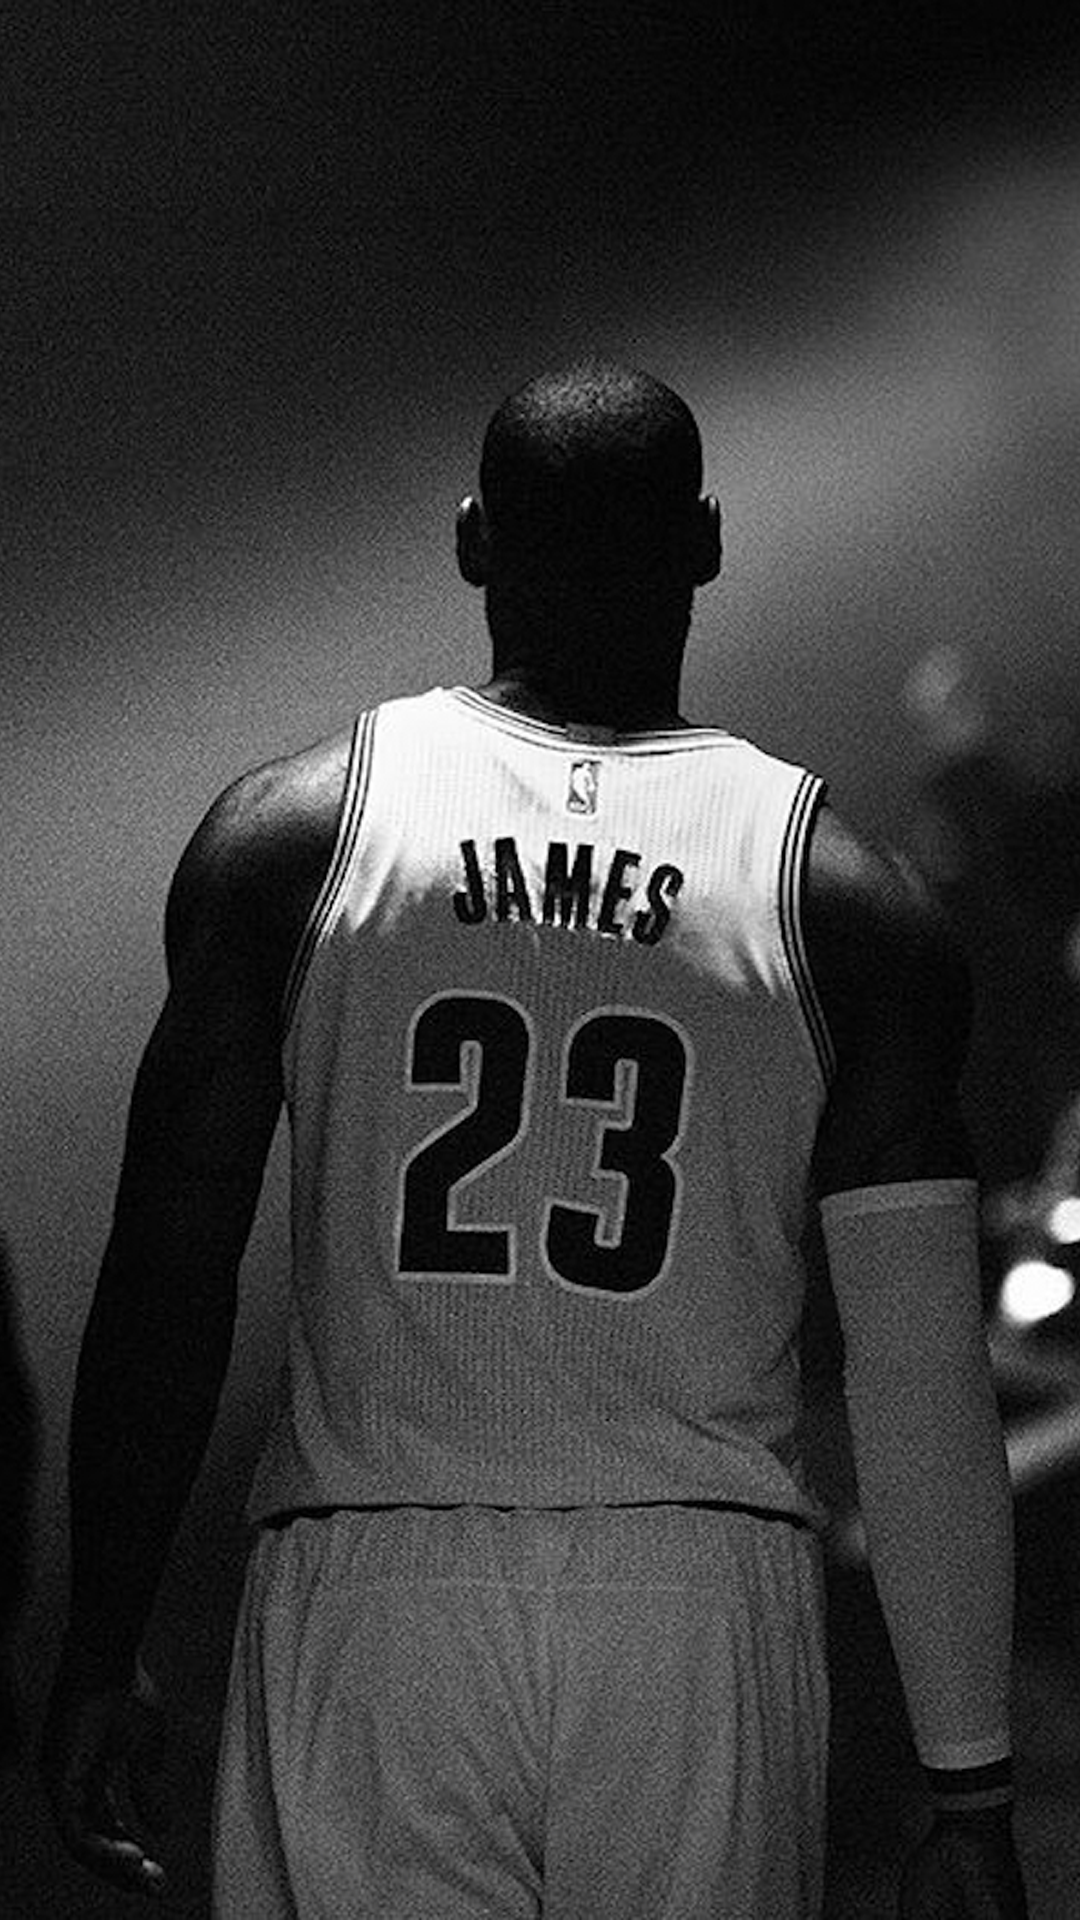 Lebron James Wallpaper for iPhone 11, Pro Max, X, 8, 7, 6 - Free Download  on 3Wallpapers